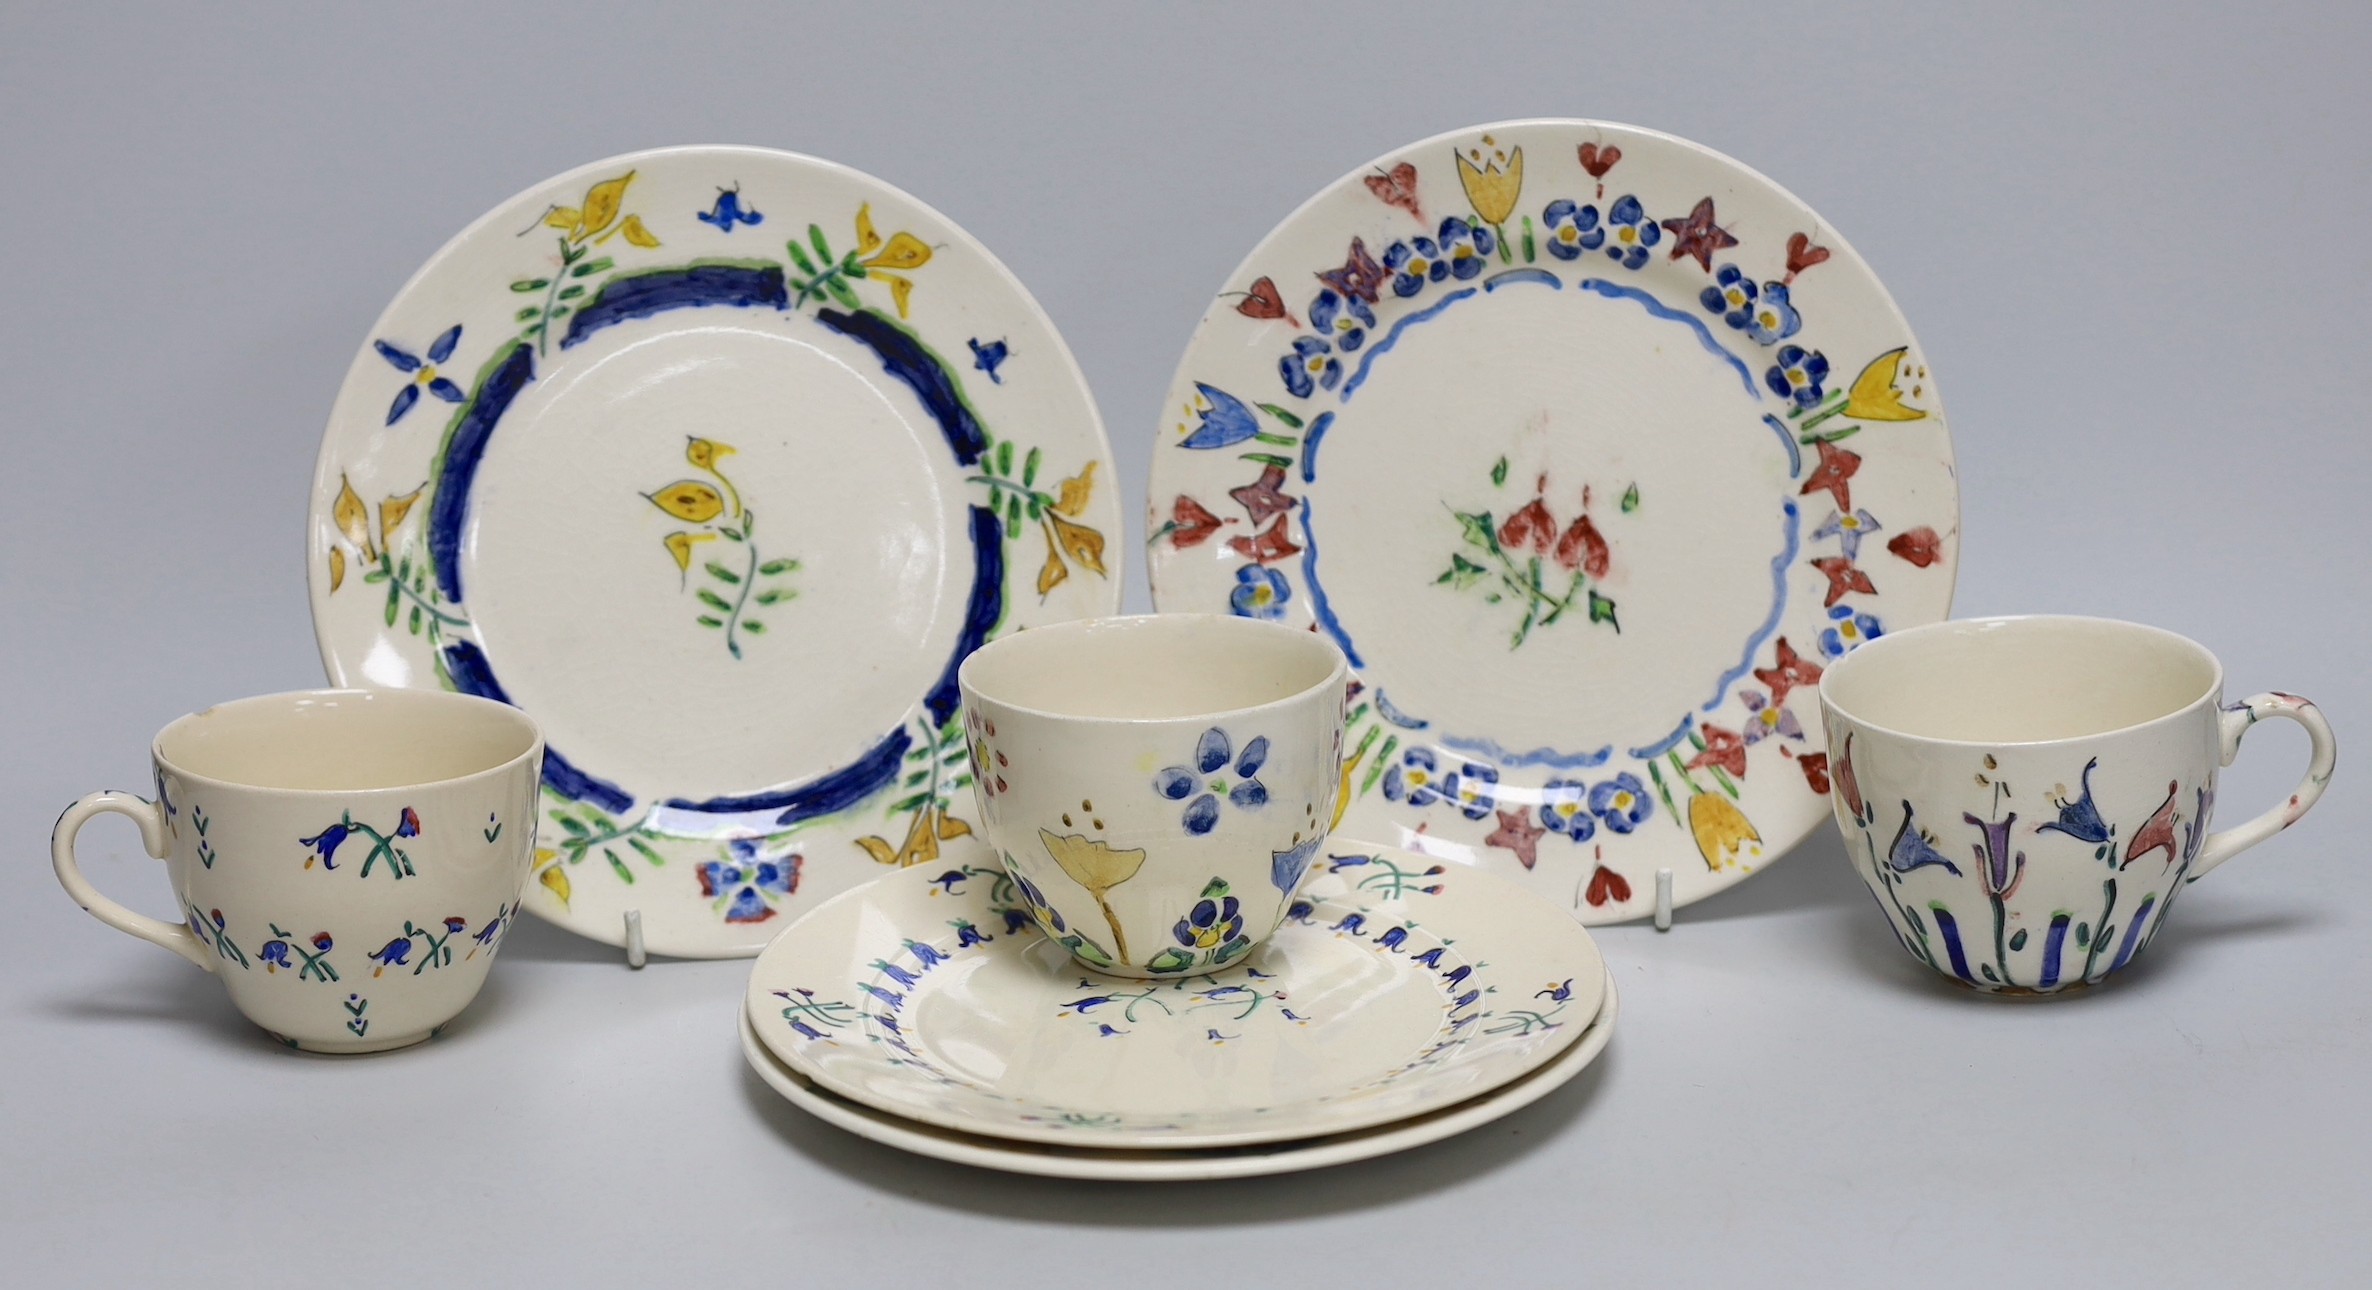 Jessie Marion King (1875-1949), four various floral design tea plates and three tea cups